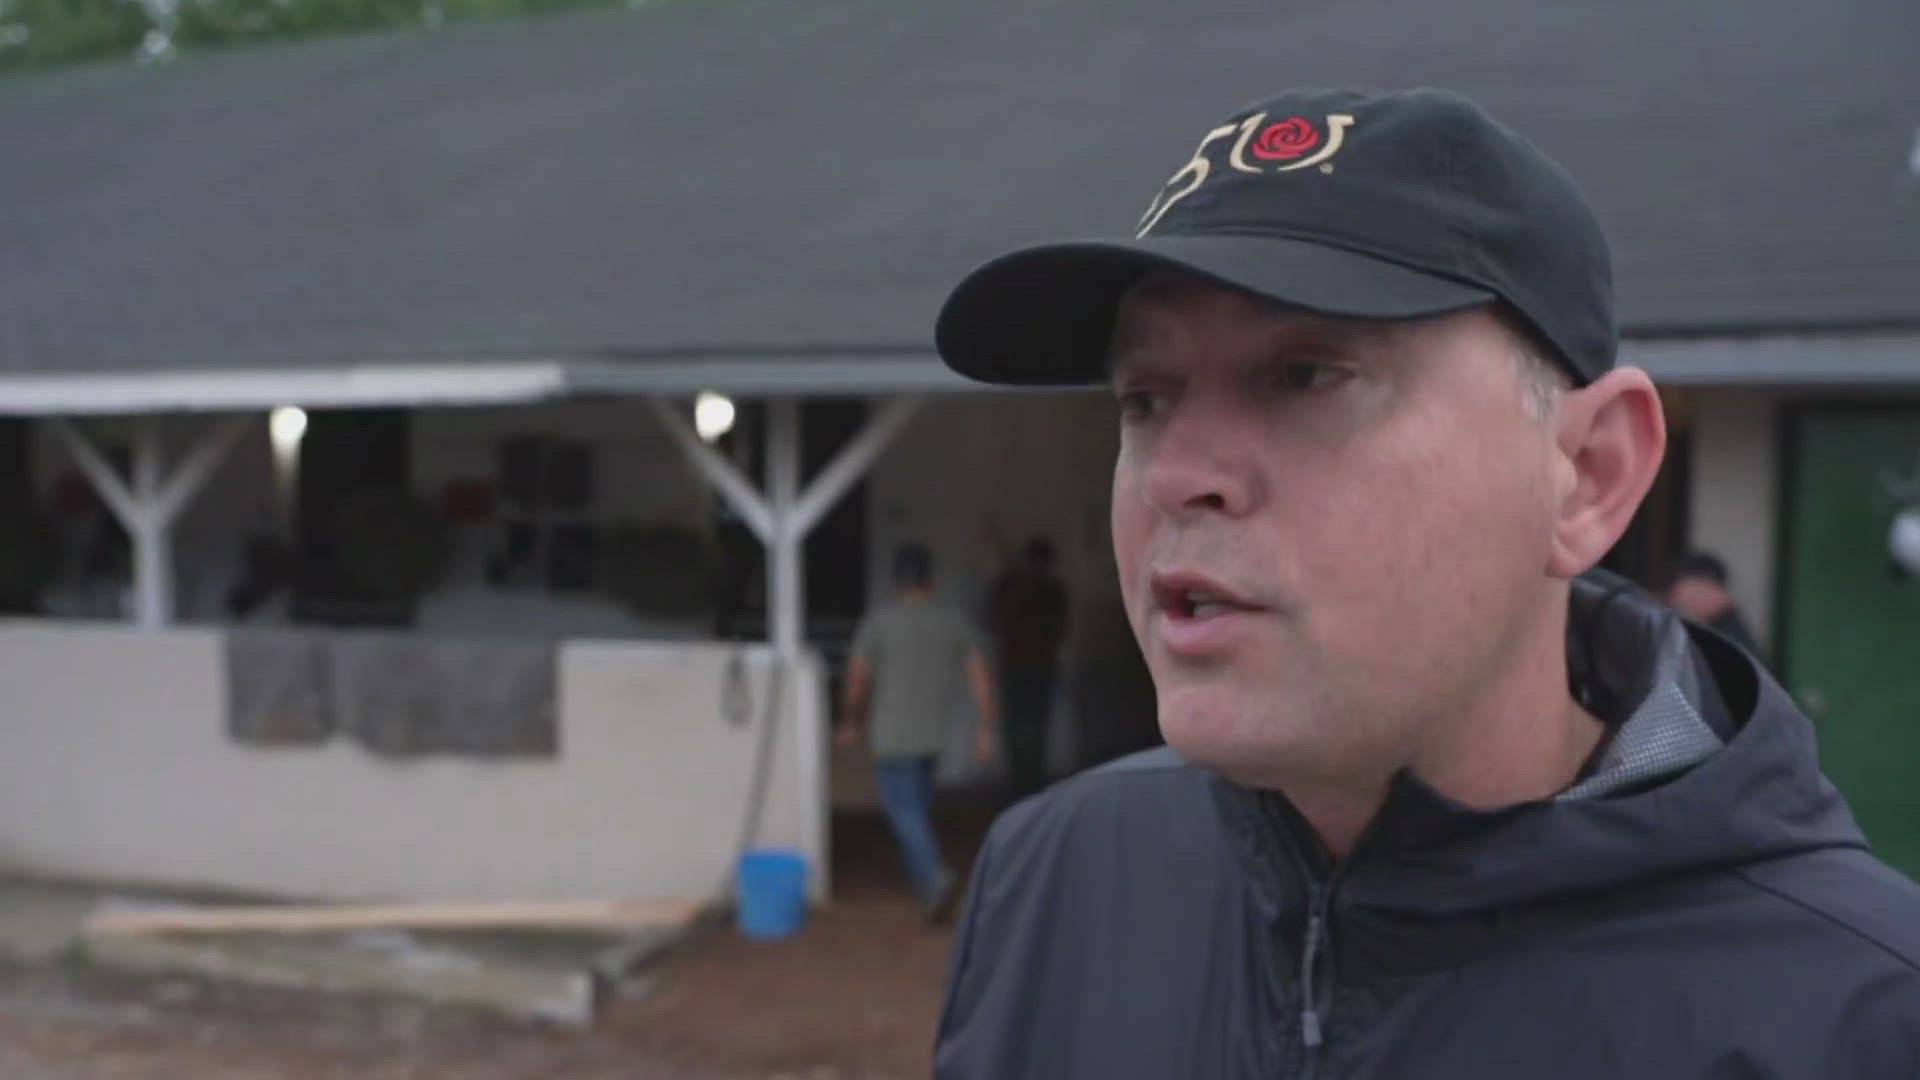 After Friday's rain drenched the track, the trainer of Sierra Leone and Domestic Product discusses how the horses will feel in the Derby race.